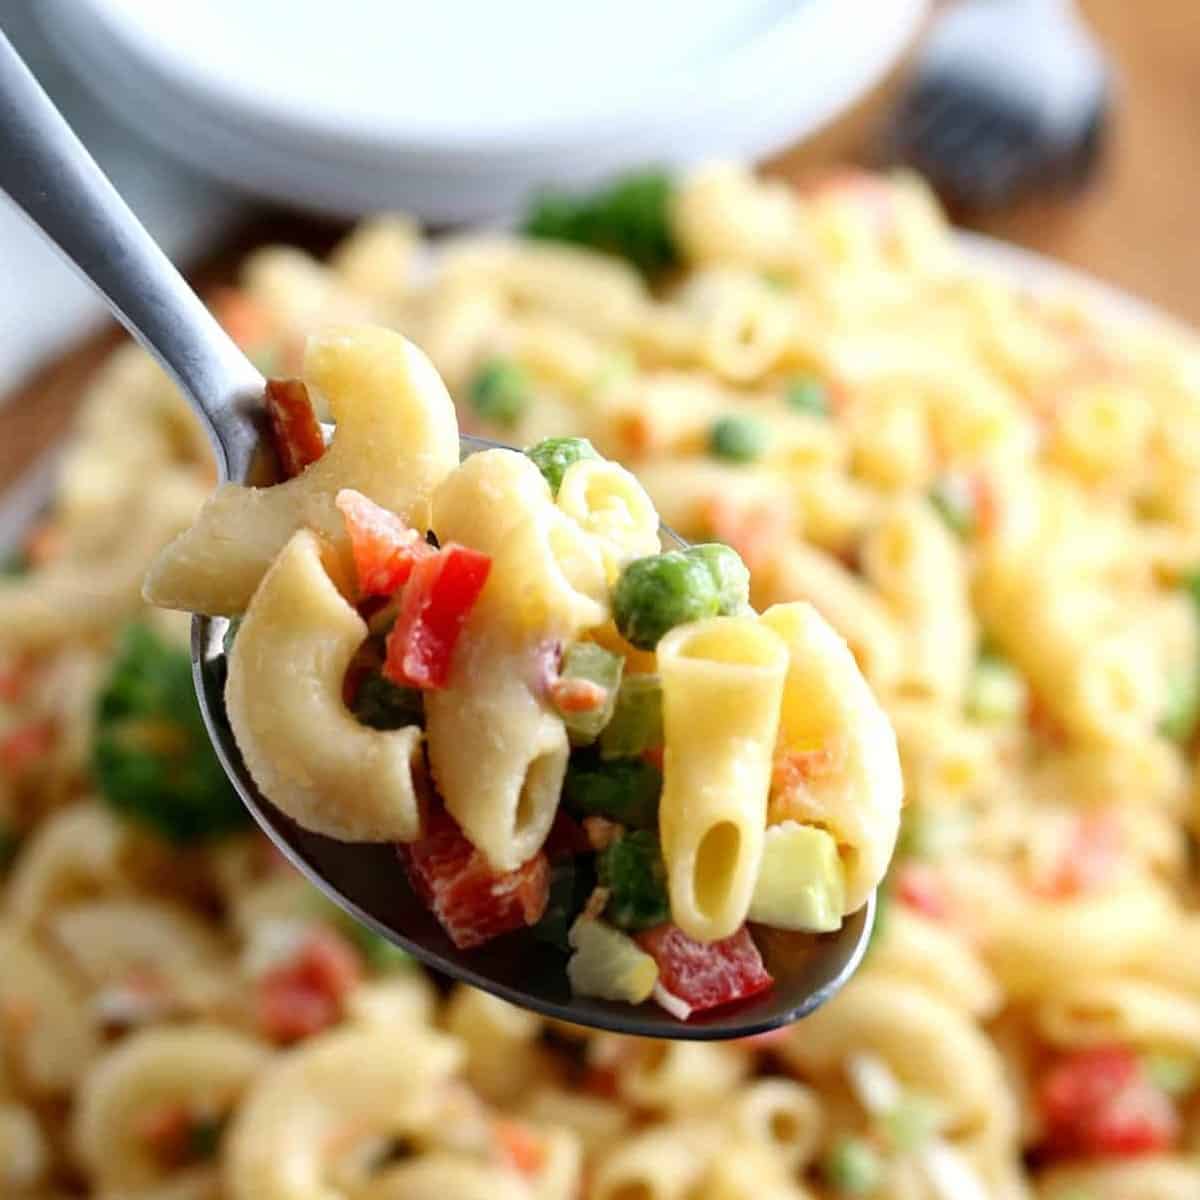 A very close up spoon that's filled with vegan macaroni salad. The bowl of pasta is blurred in the background.